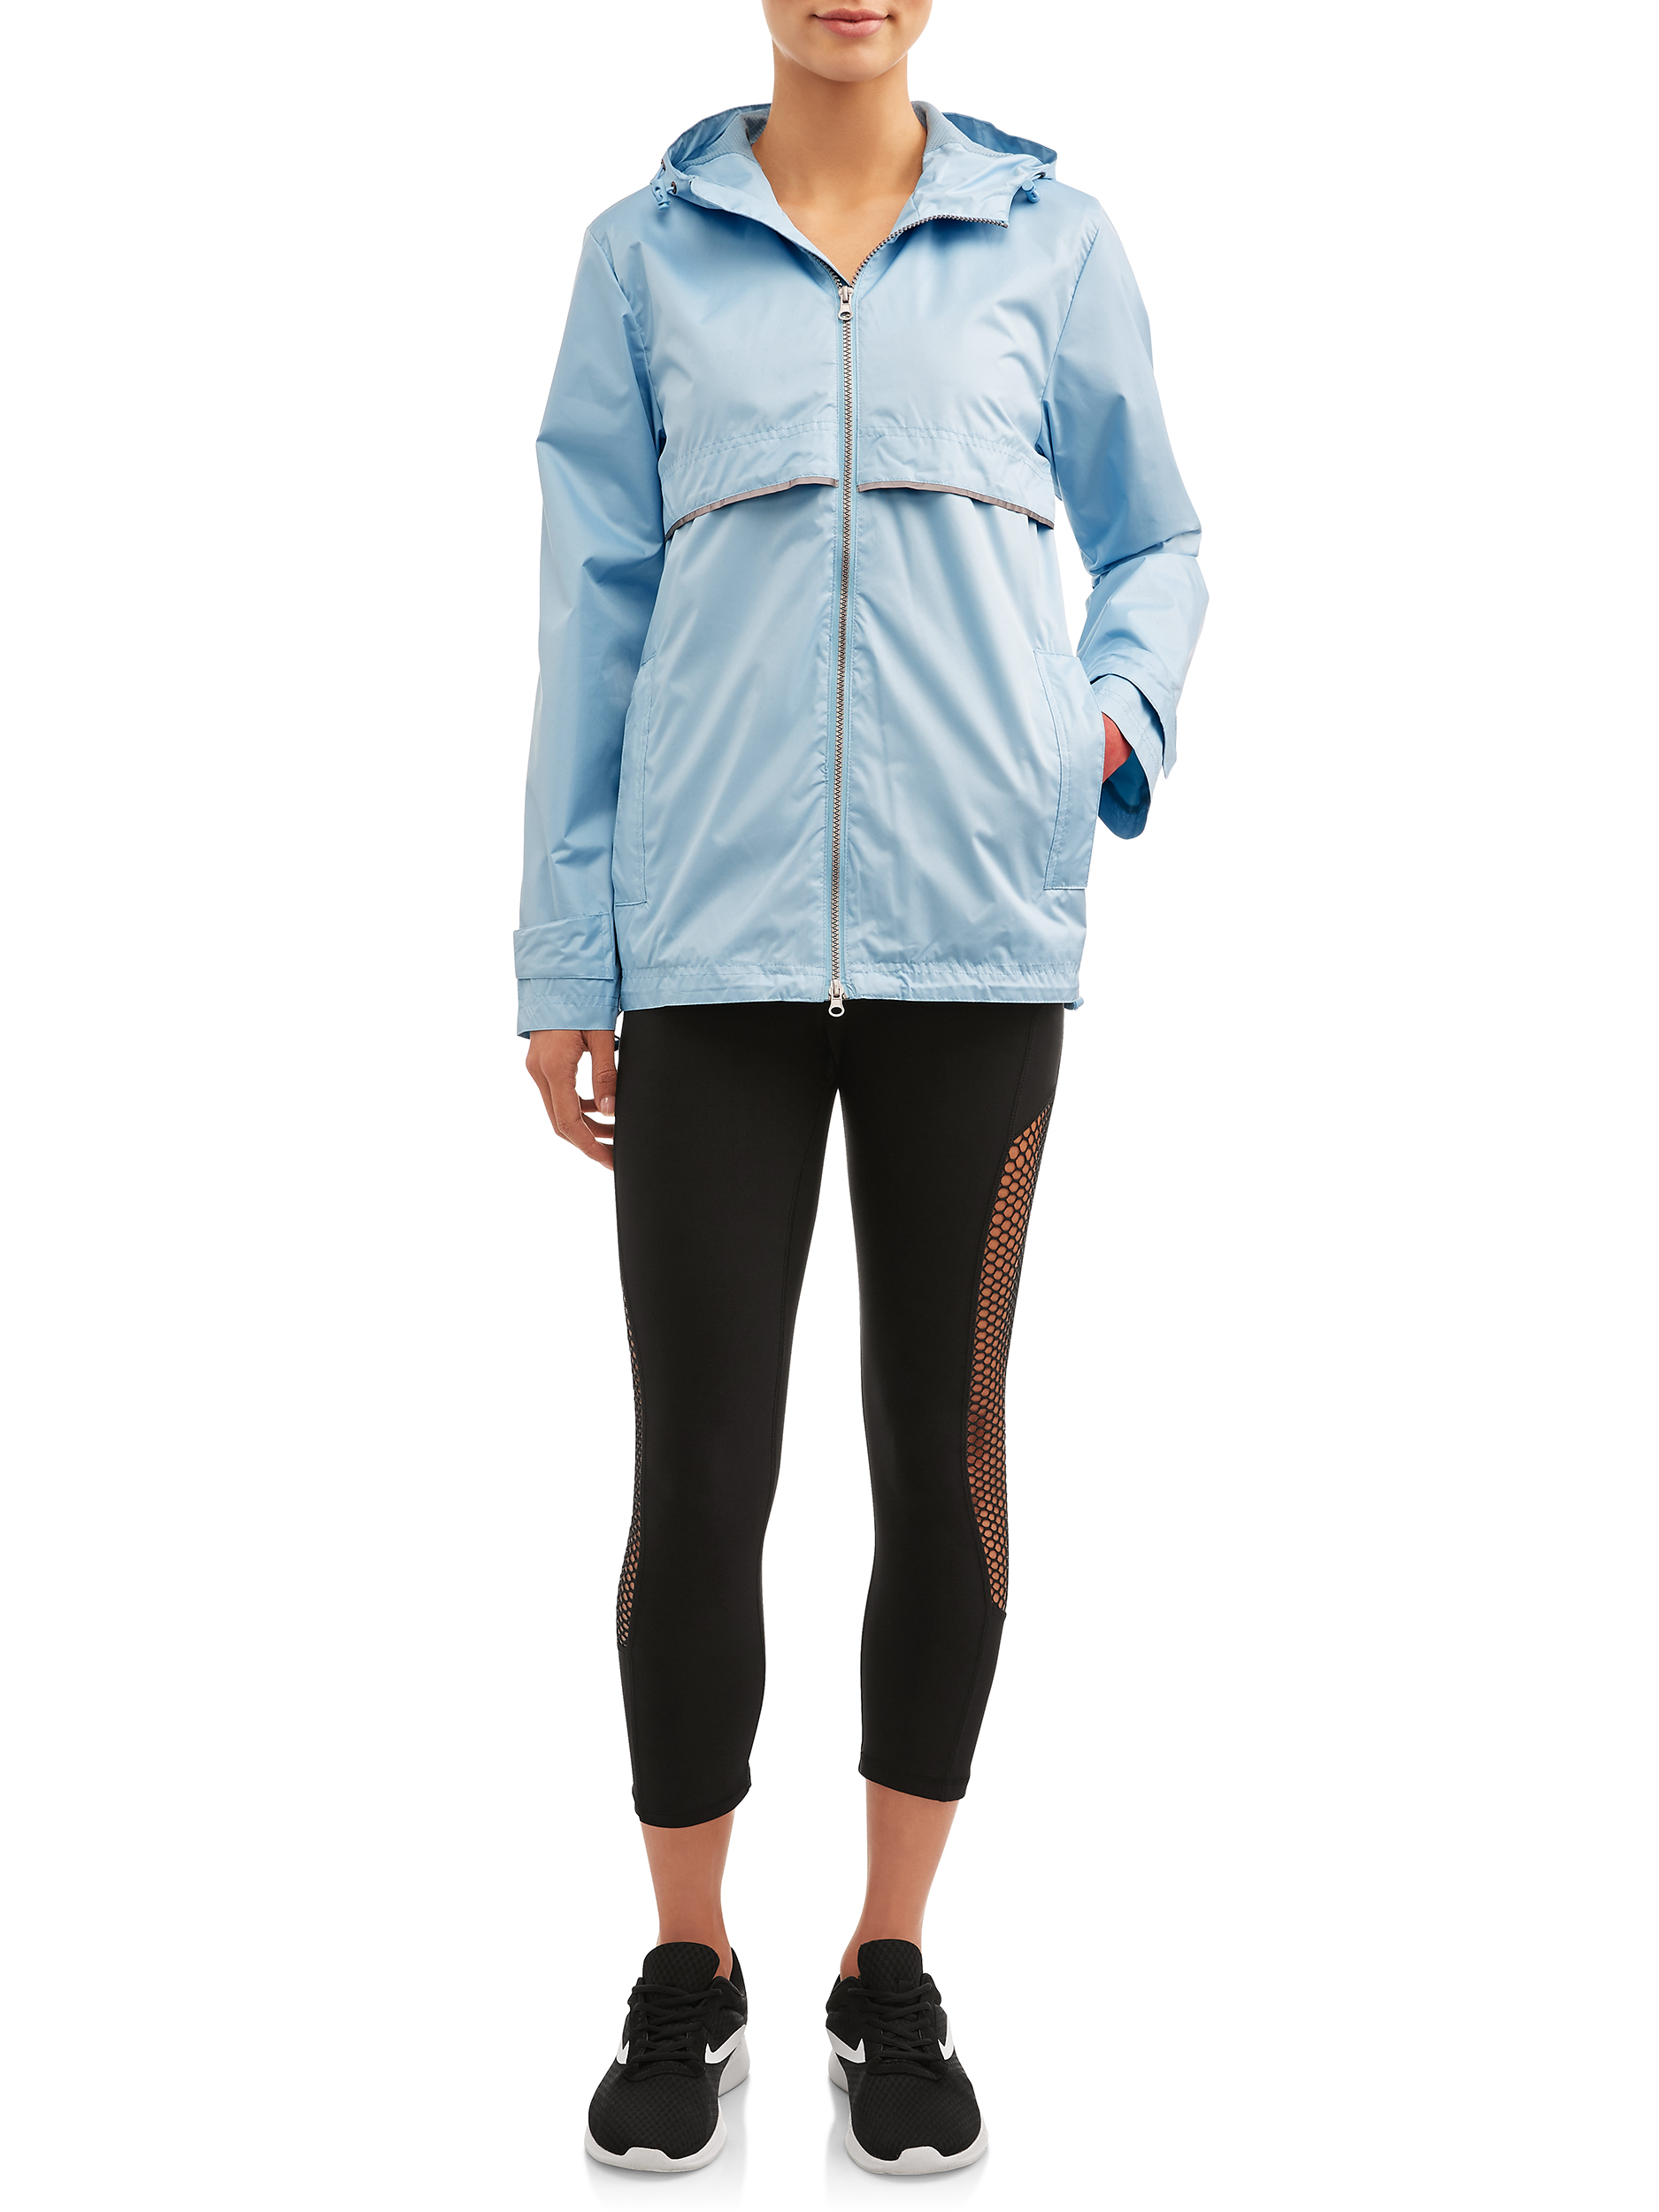 Climate Concepts Women's Hooded Windbreaker Jacket - image 2 of 4